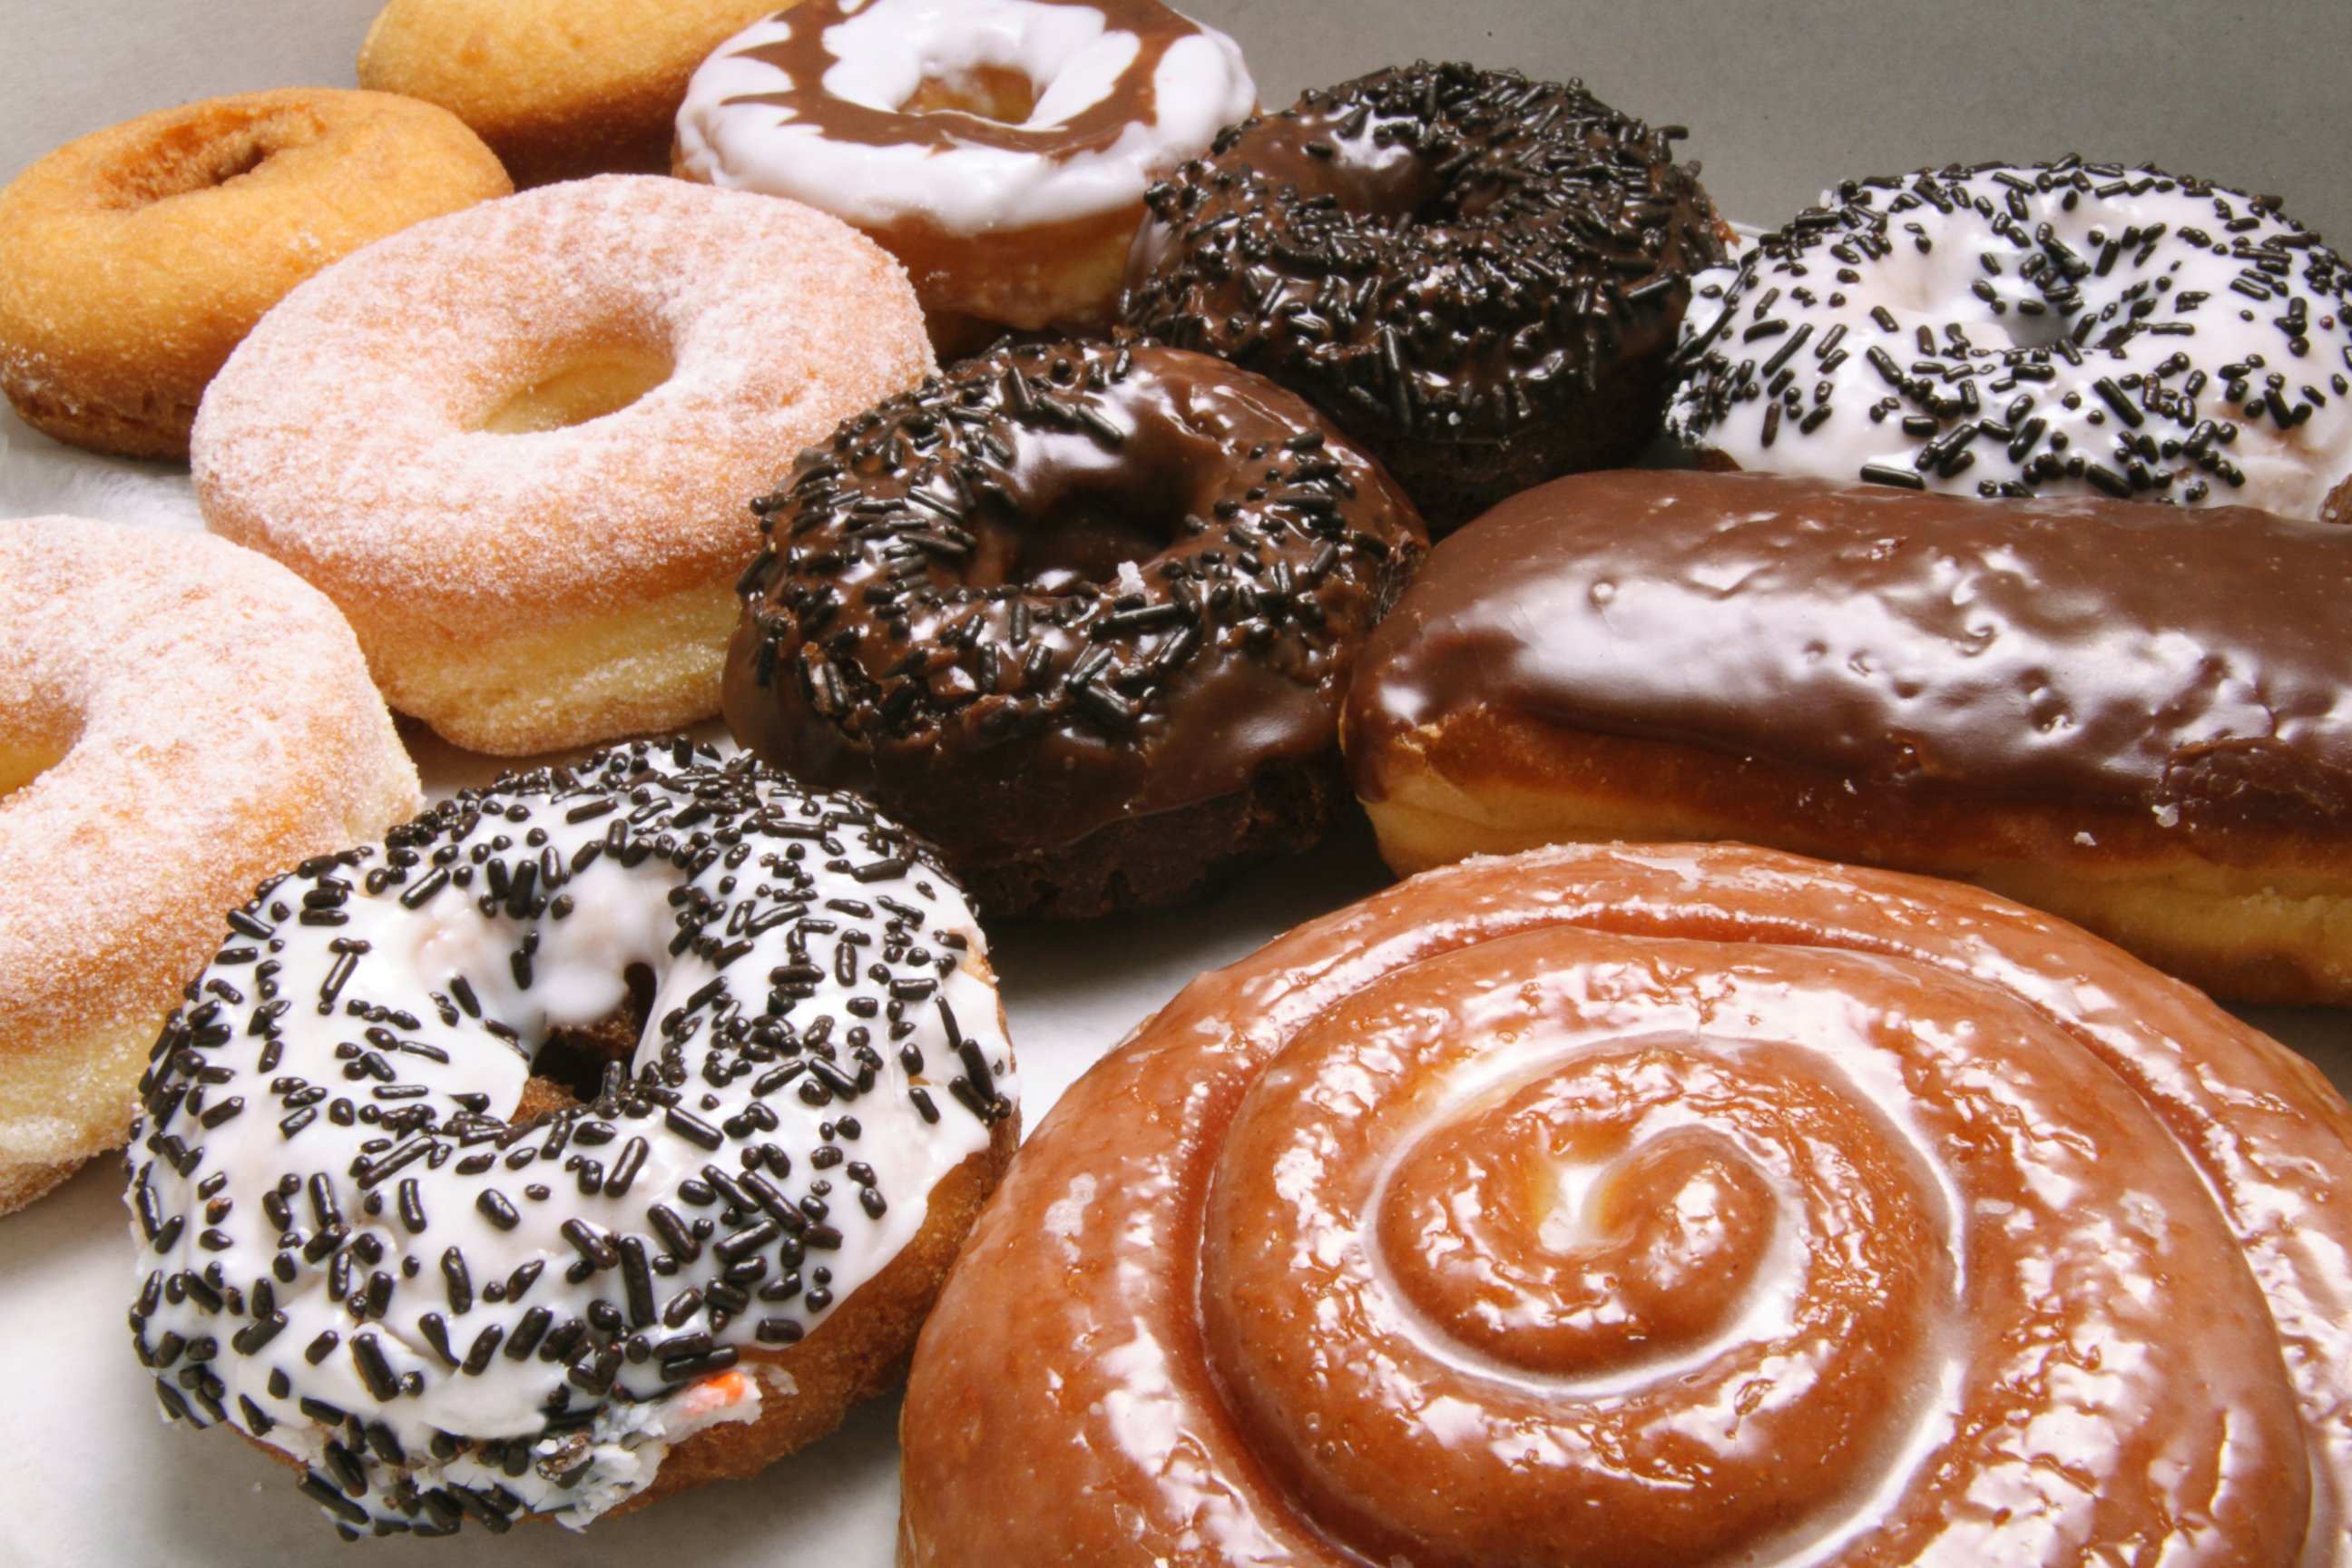 PHOTO: A variety of doughnuts is shown.